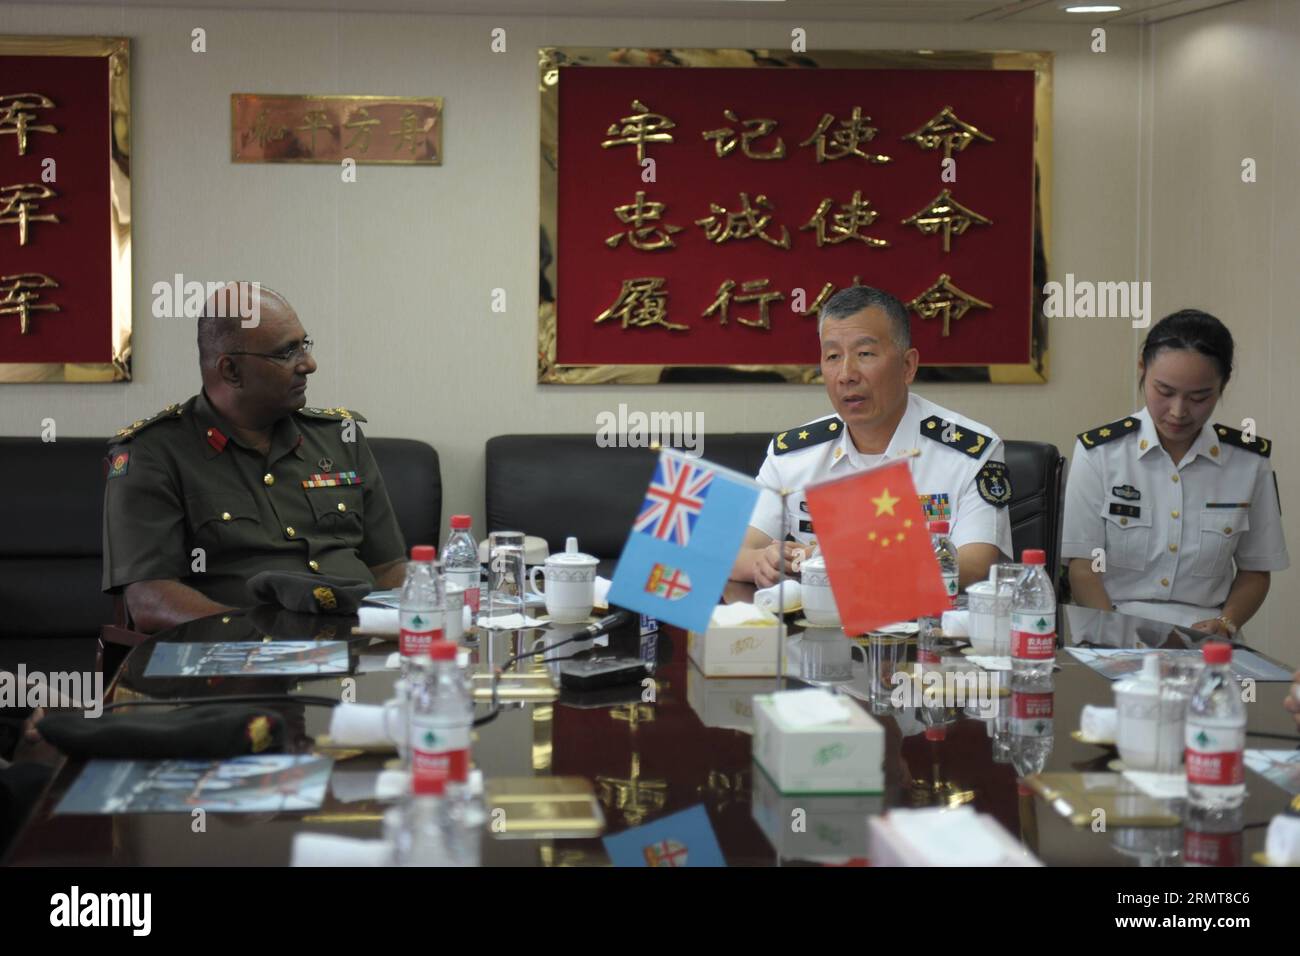 (140822) -- SUVA, Aug. 22, 2014 -- Shen Hao (C), deputy commander of the East China Sea Fleet of the Chinese Navy and commander of Mission Harmony-2014 , meets with Brig. Gen. Mohammed Aziz (L), chief-of-staff of the Republic of Fiji Military Forces in Suva, Fiji, Aug. 22, 2014. Peace Ark, hospital ship of China s People s Liberation Army Navy, arrived at the Fijian capital of Suva on Friday, kicking off its week-long medical assistance mission in the South Pacific island country. ) FIJI-SUVA-CHINA S PEACE ARK HOSPITAL SHIP MichaelxYang PUBLICATIONxNOTxINxCHN   Suva Aug 22 2014 Shen Hao C Depu Stock Photo